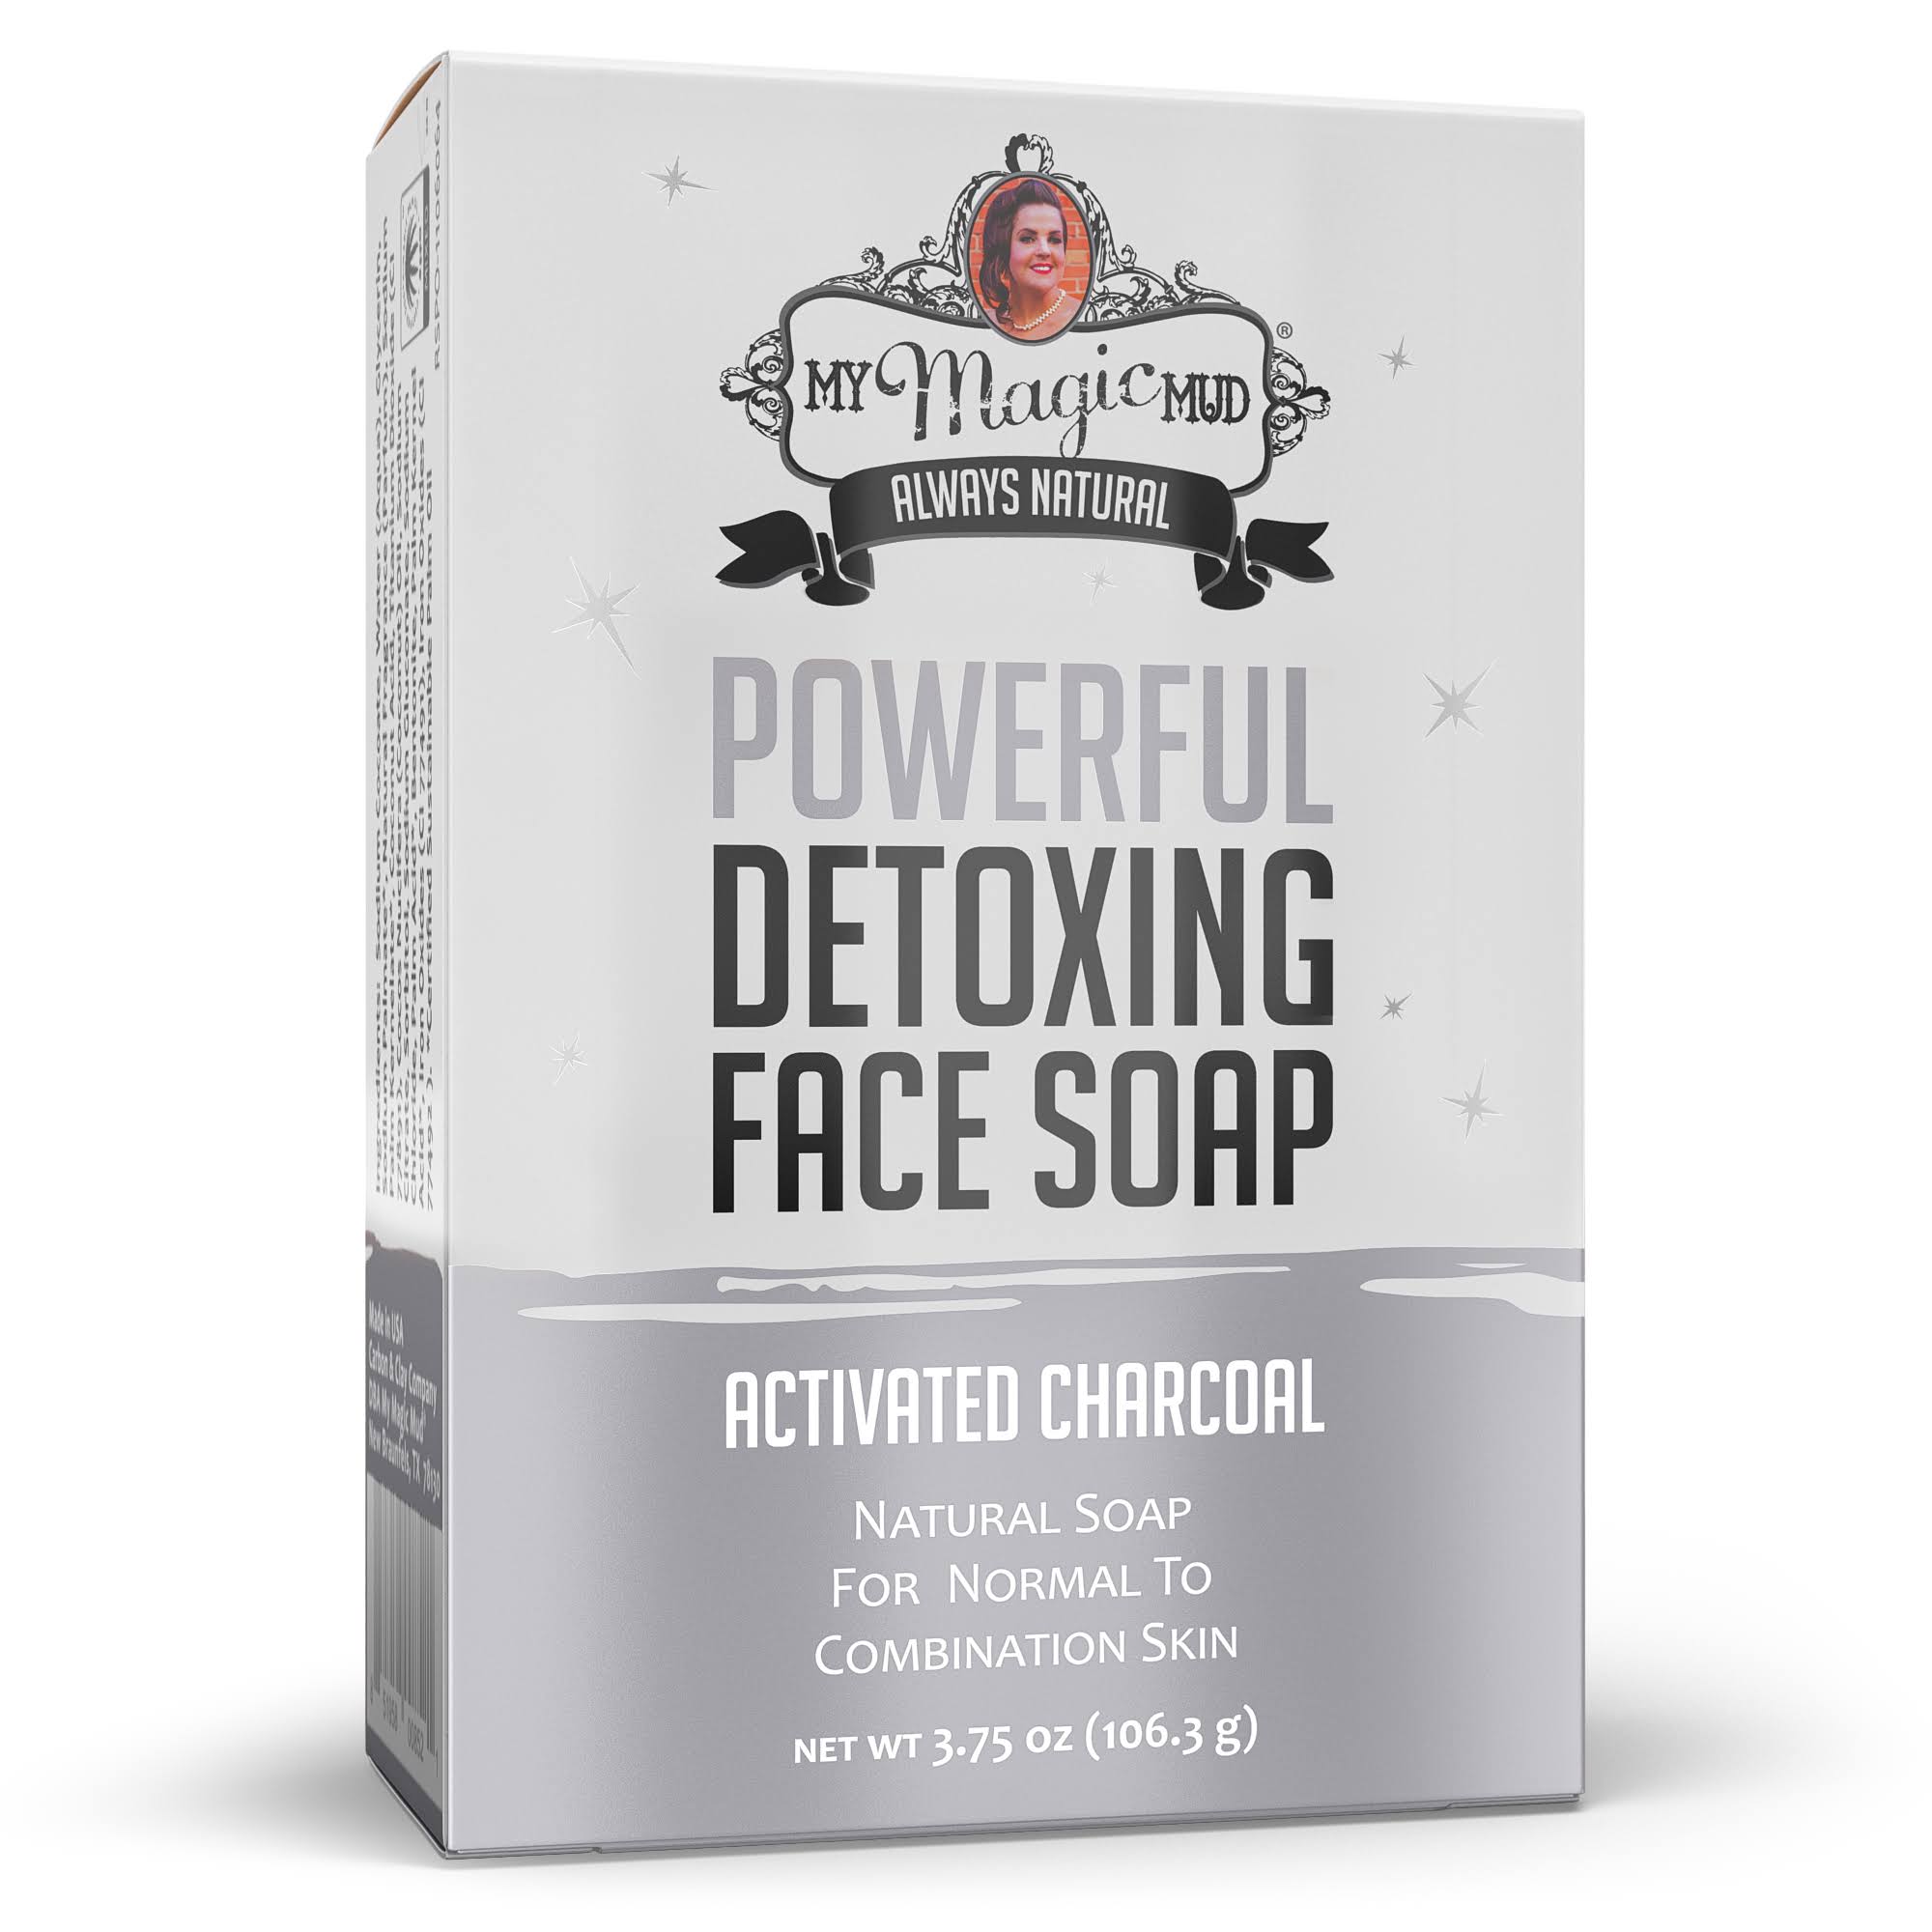 Powerful Detoxing Activated Charcoal Face Soap - 3.75oz